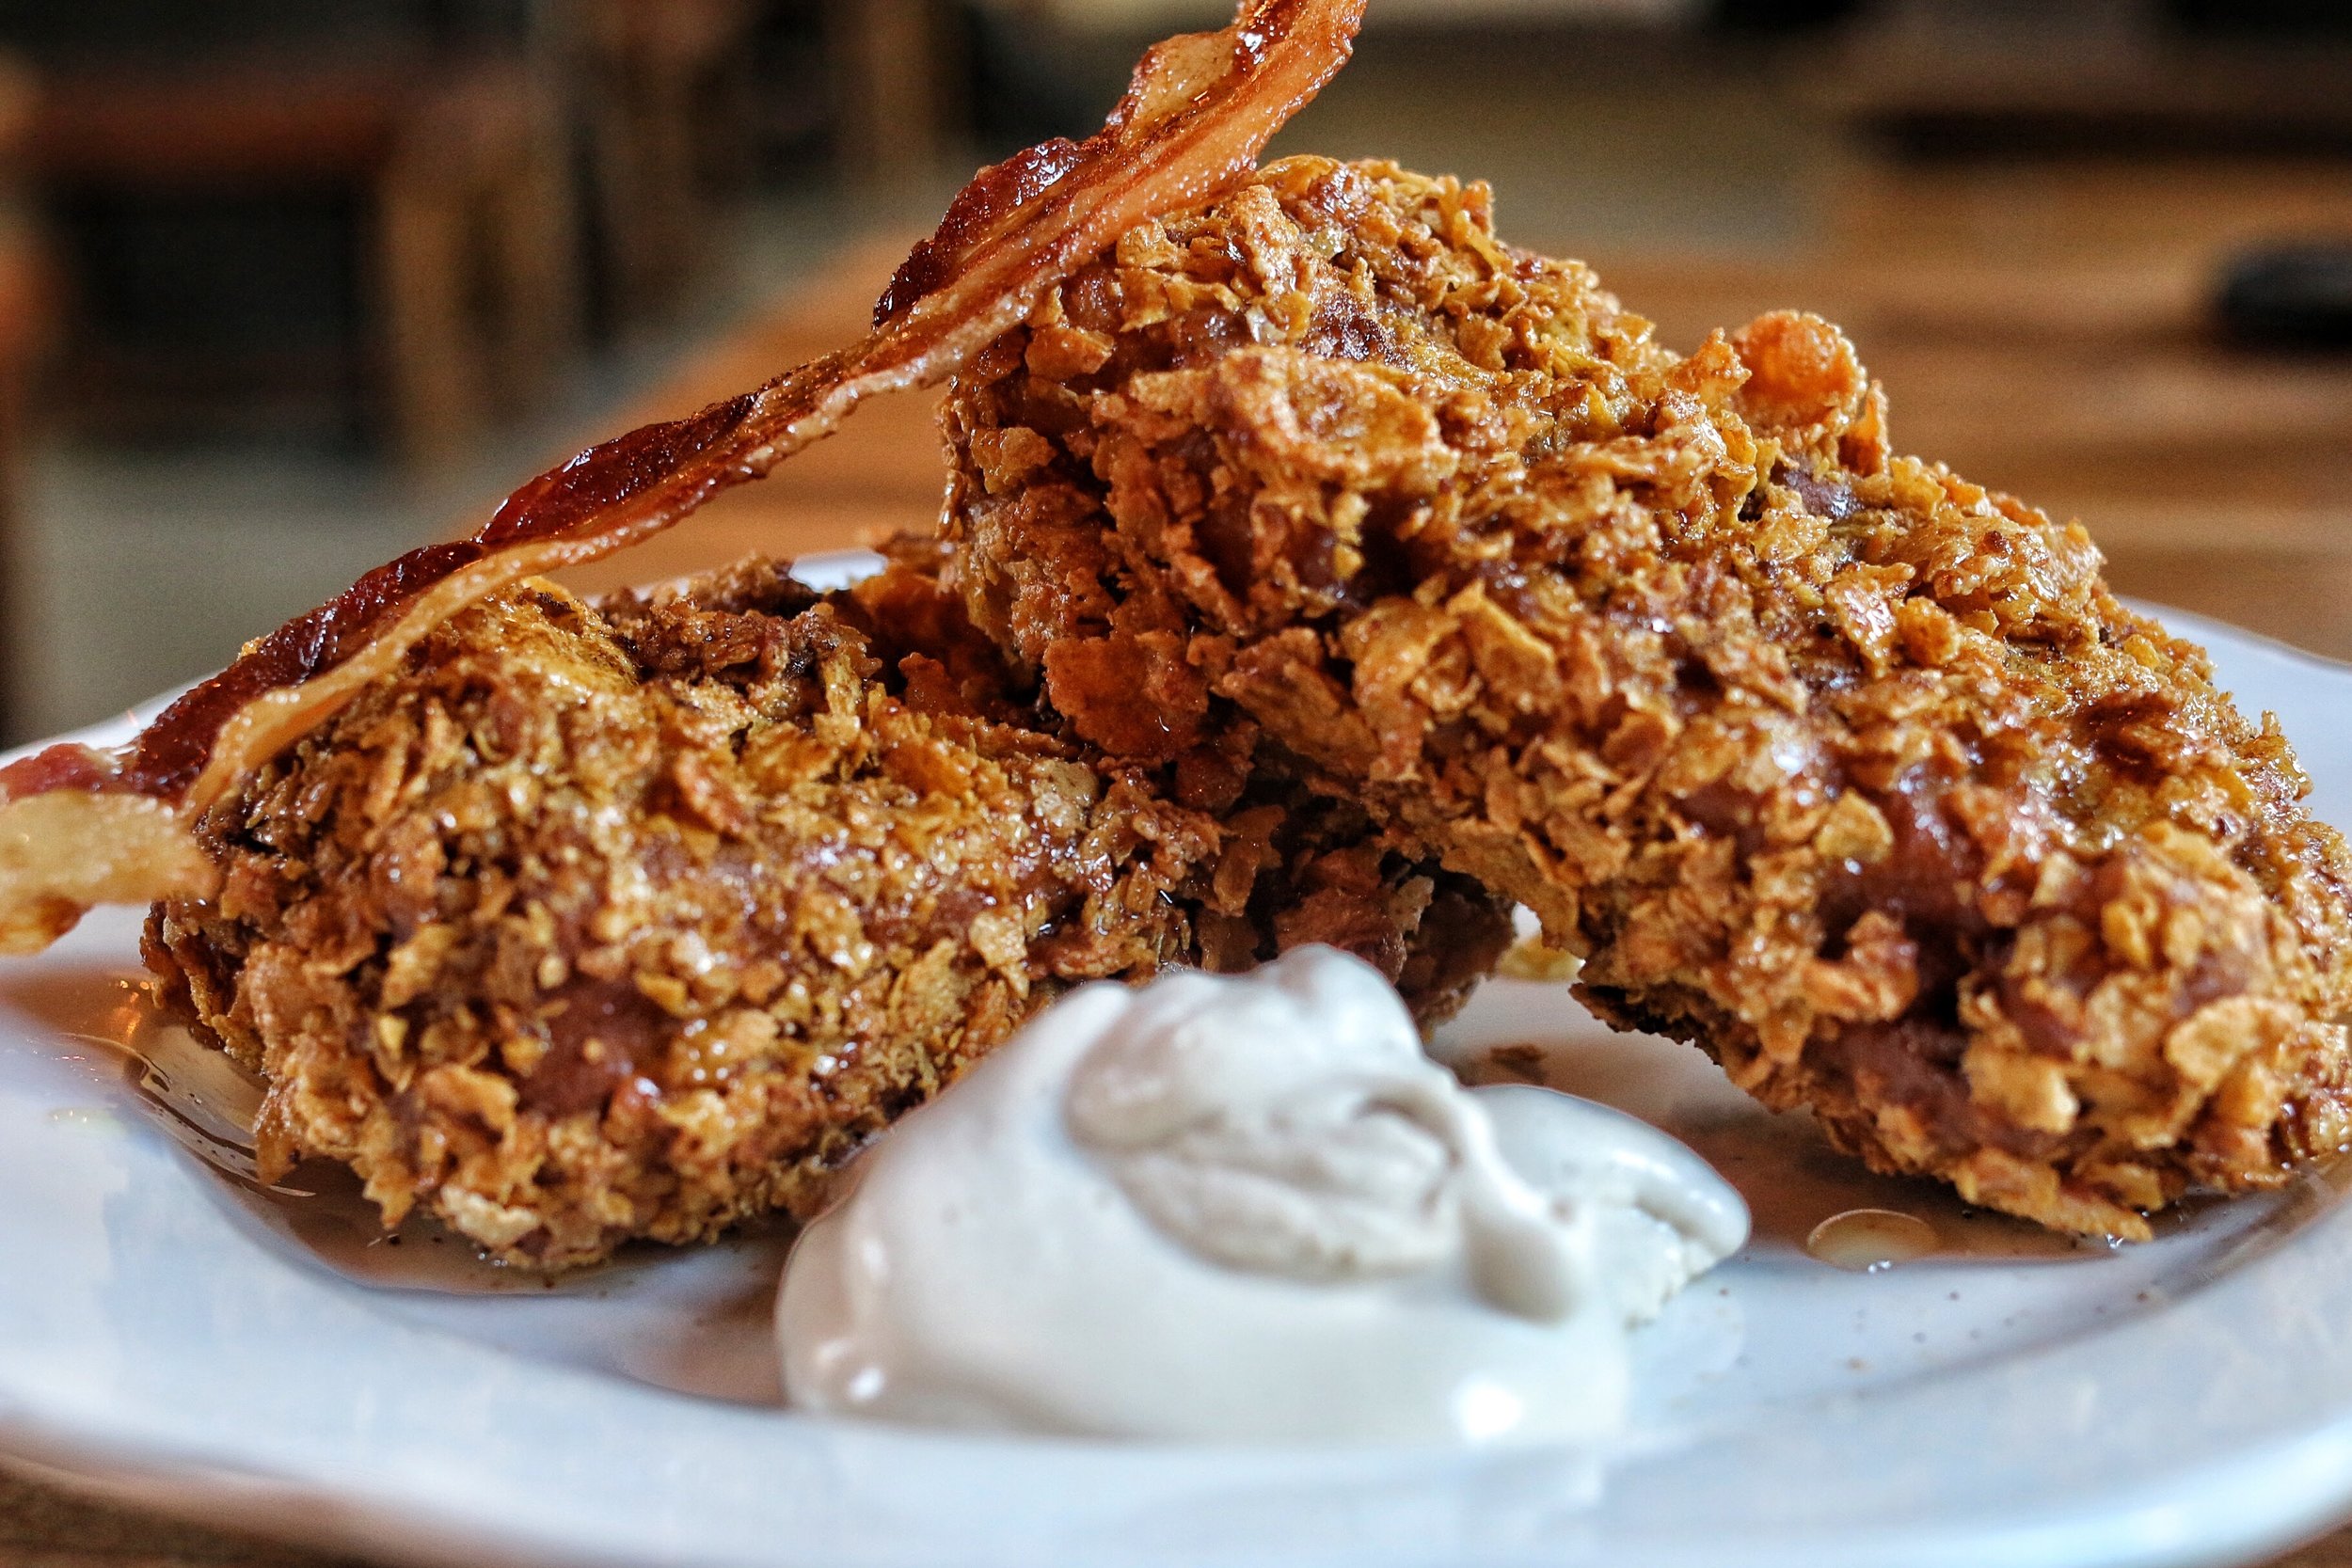  cornflake crusted french toast with bacon 